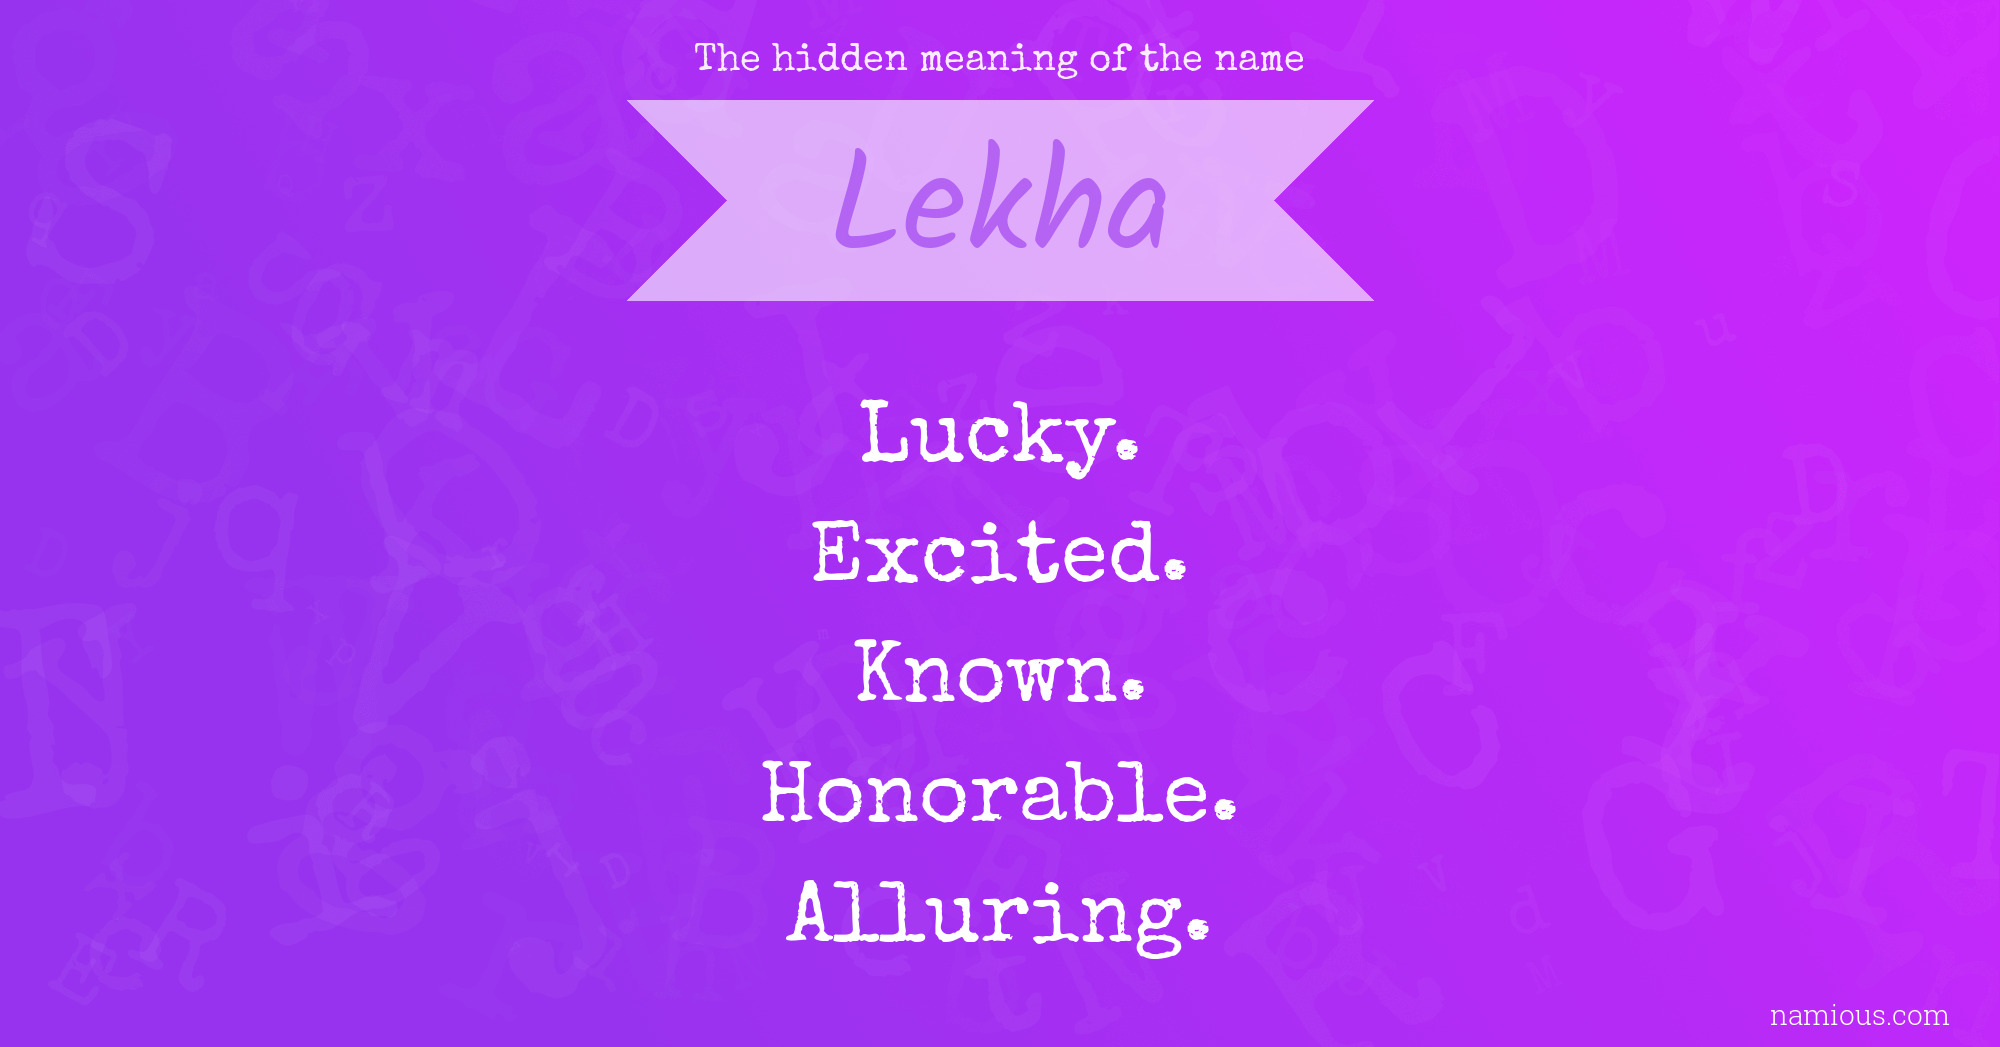 The hidden meaning of the name Lekha